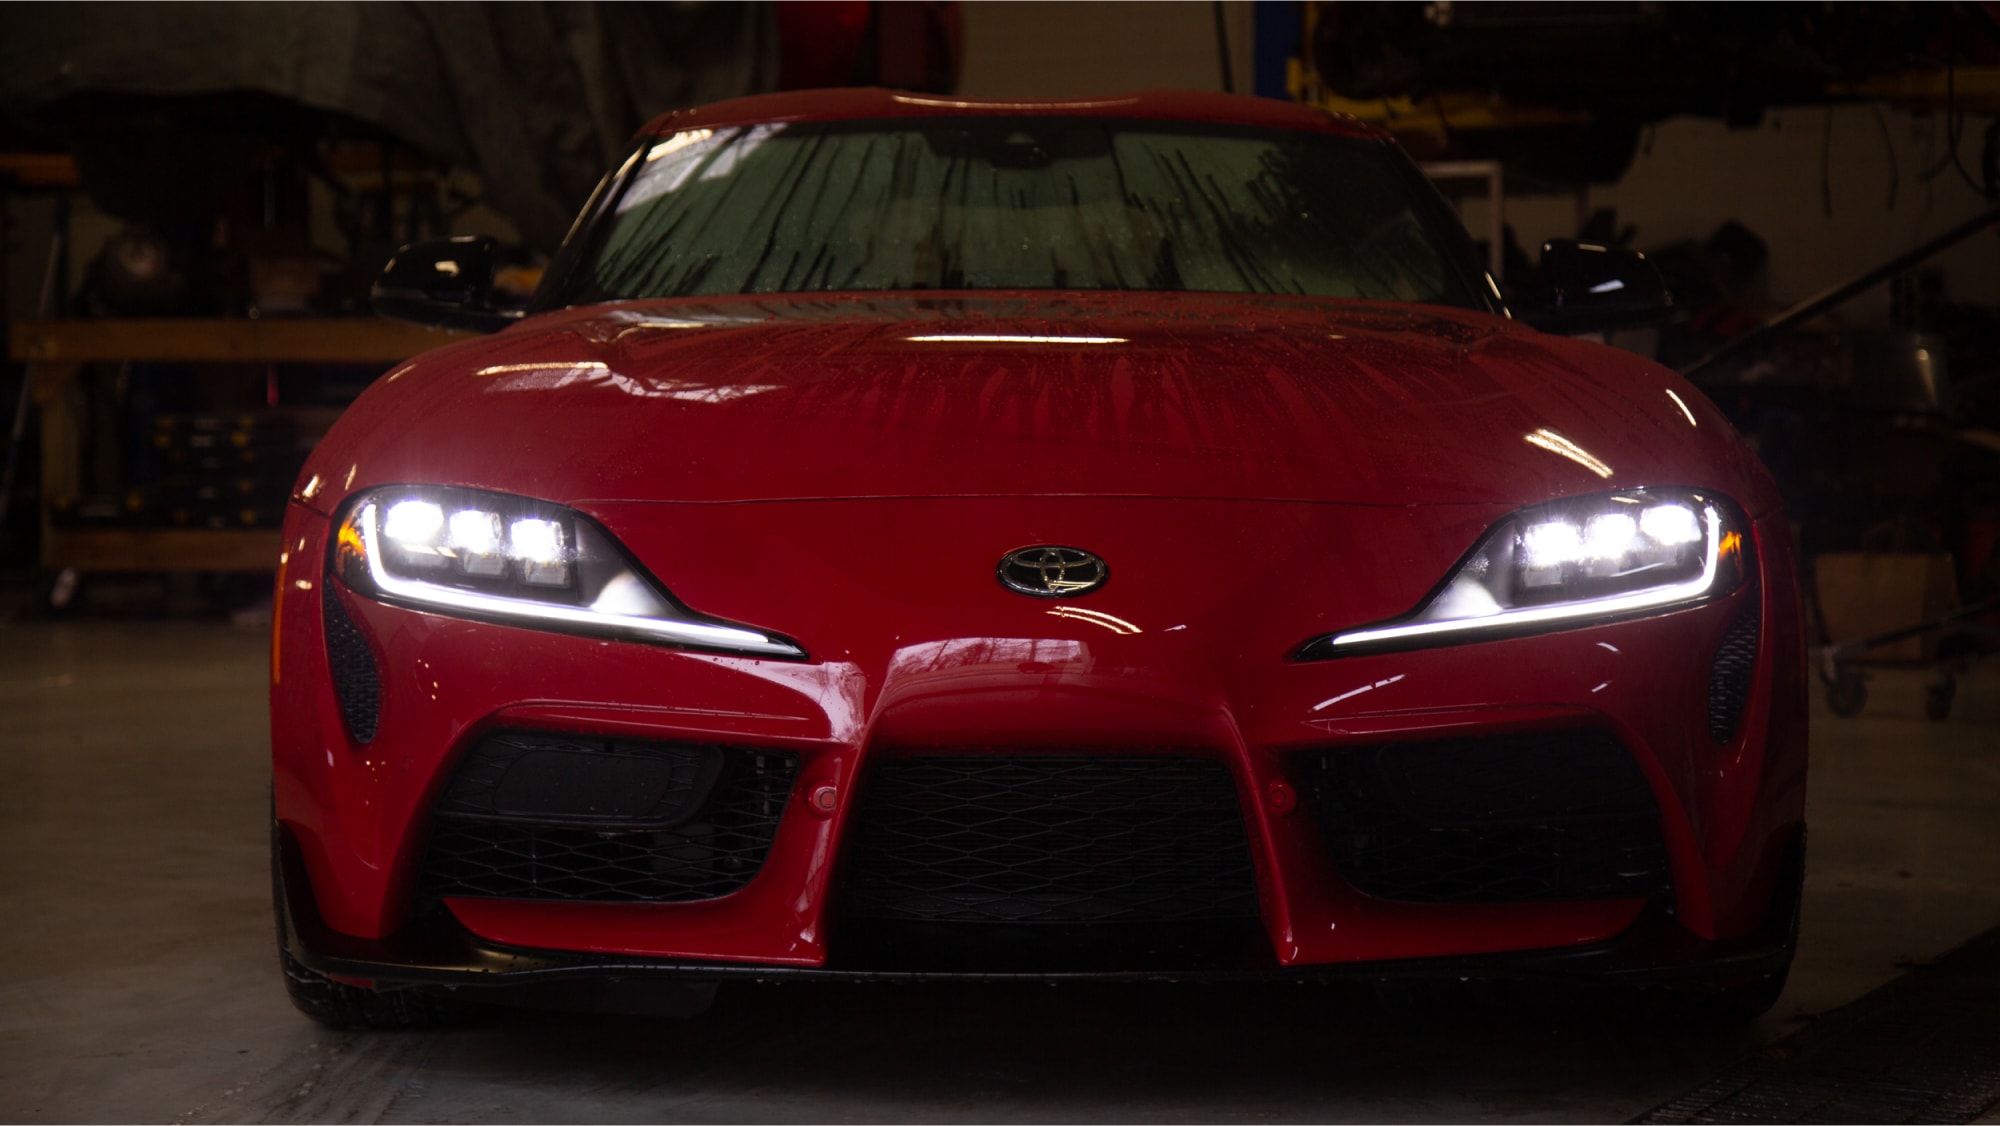 How to Detail a Car With the Toyota GR Supra Christina Roki red step by step wash car show 